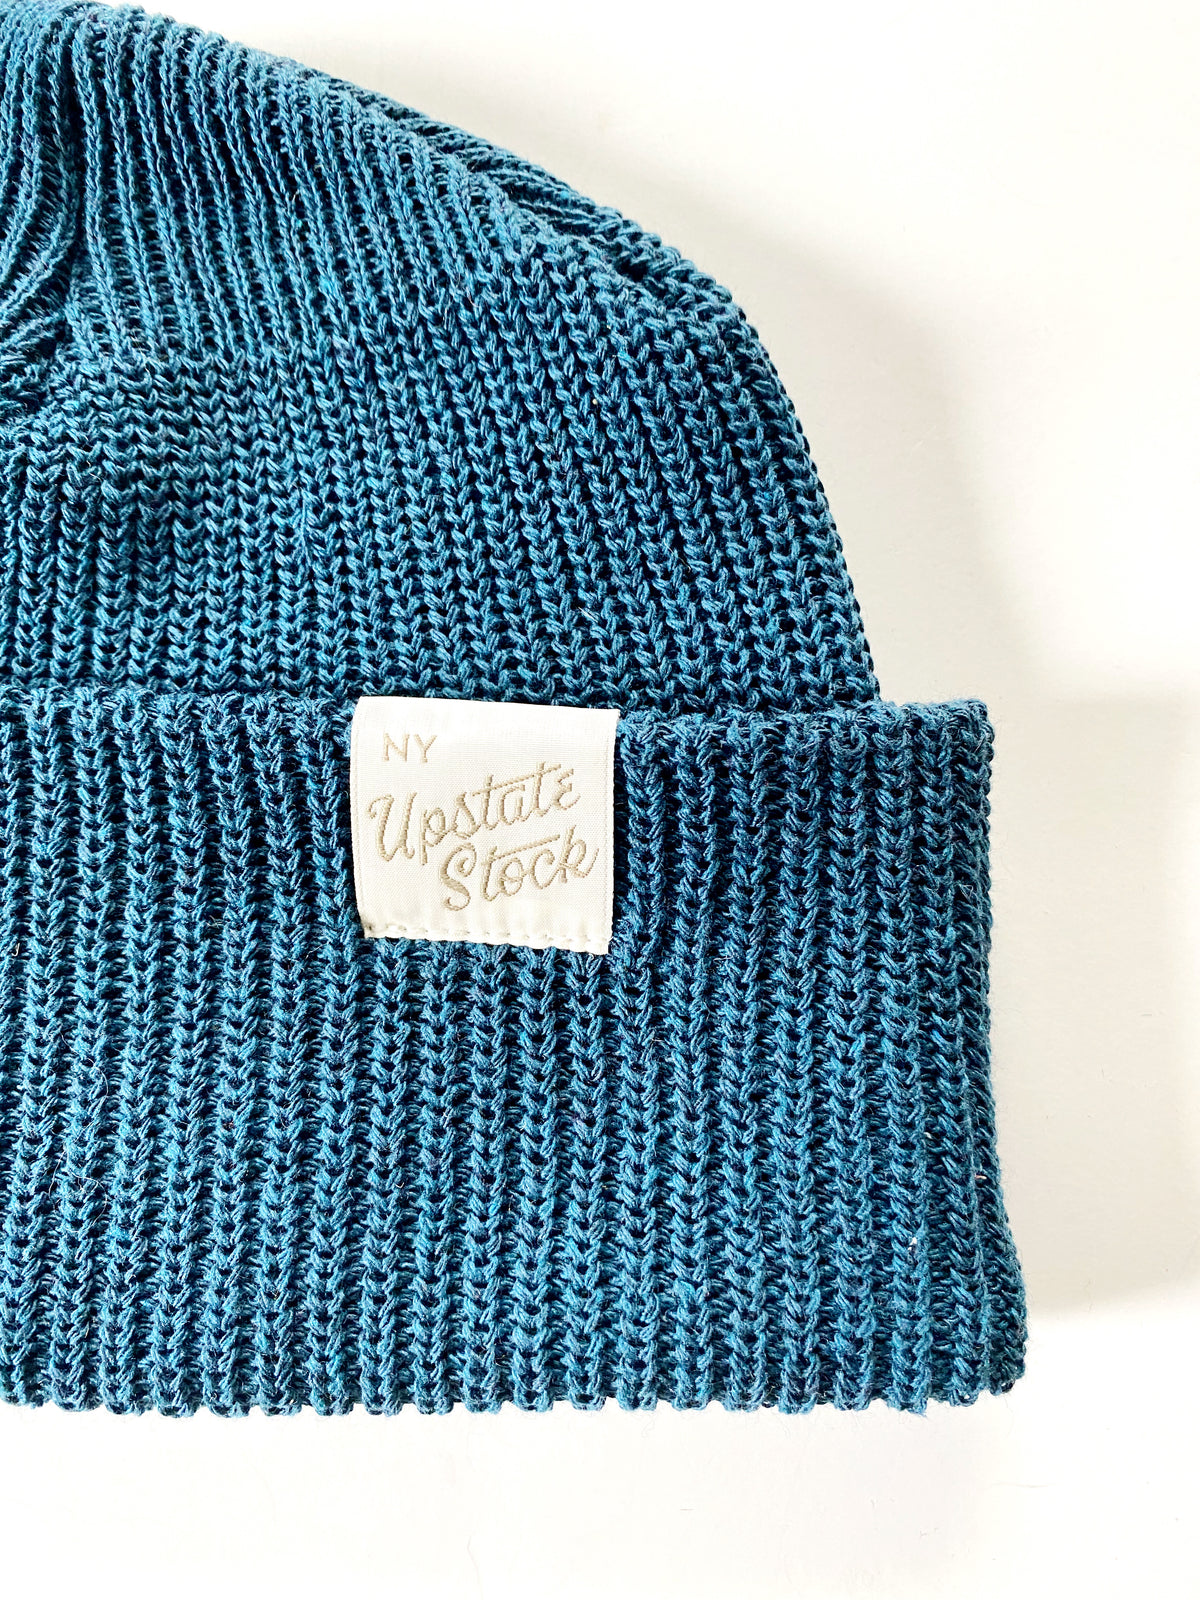 Upstate Stock: Upcycled Cotton Beanie Multiple Colors